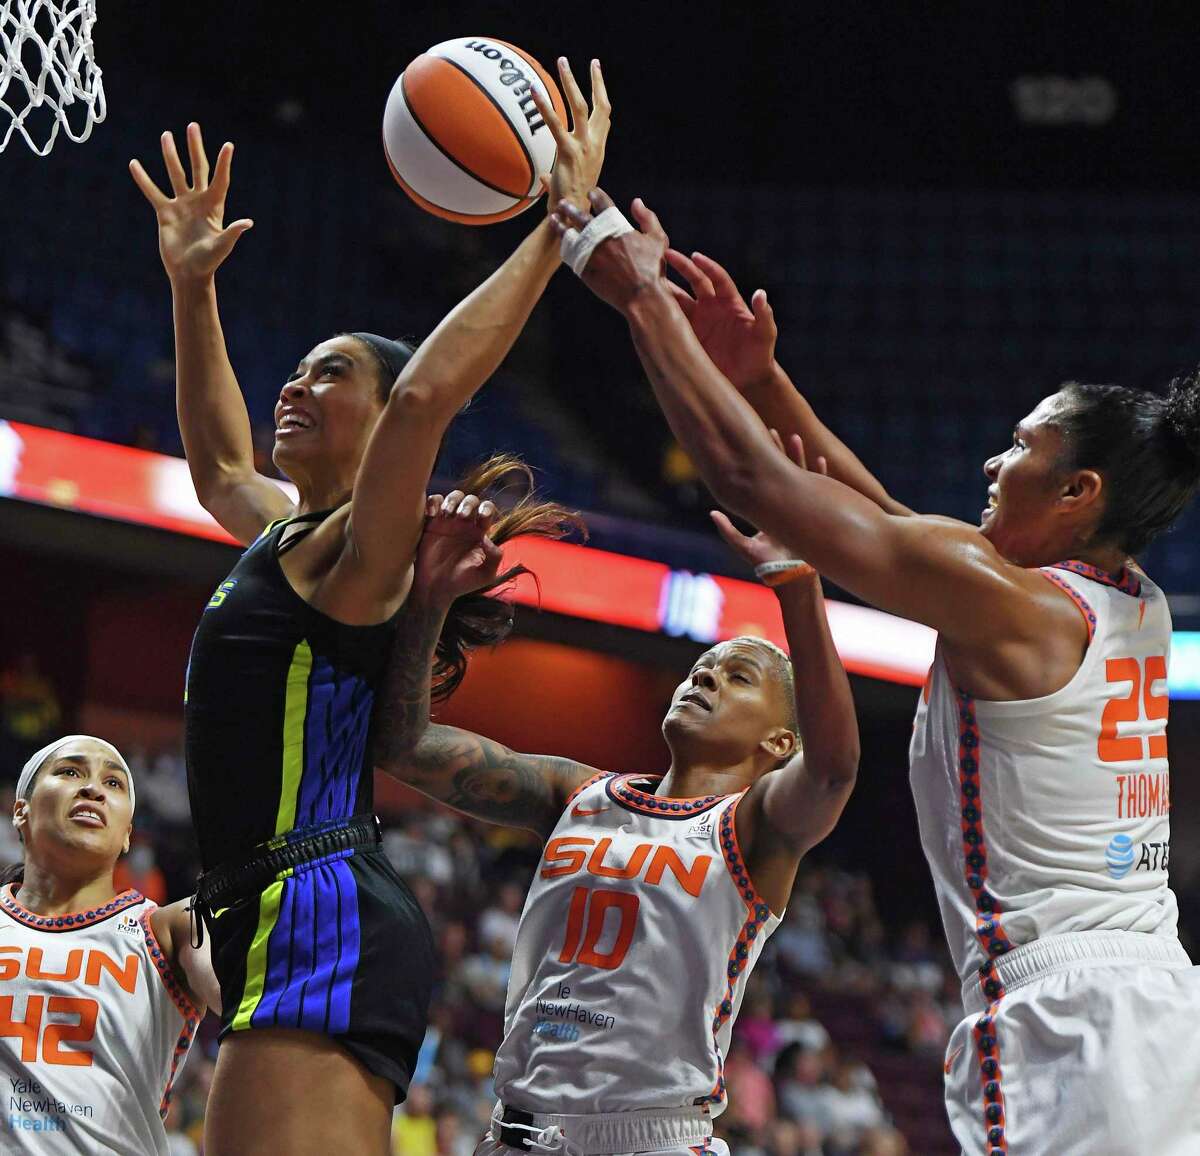 Dallas Wings forward Isabelle Harrison, second from left, battles against Connecticut Sun forward Alyssa Thomas (25), guard Courtney Williams (10), and center Brionna Jones (42) for a rebound during Game 1 of a WNBA basketball first-round playoff series Thursday, Aug. 18, 2022, in Uncasville, Conn. (Sean D. Elliot/The Day via AP)